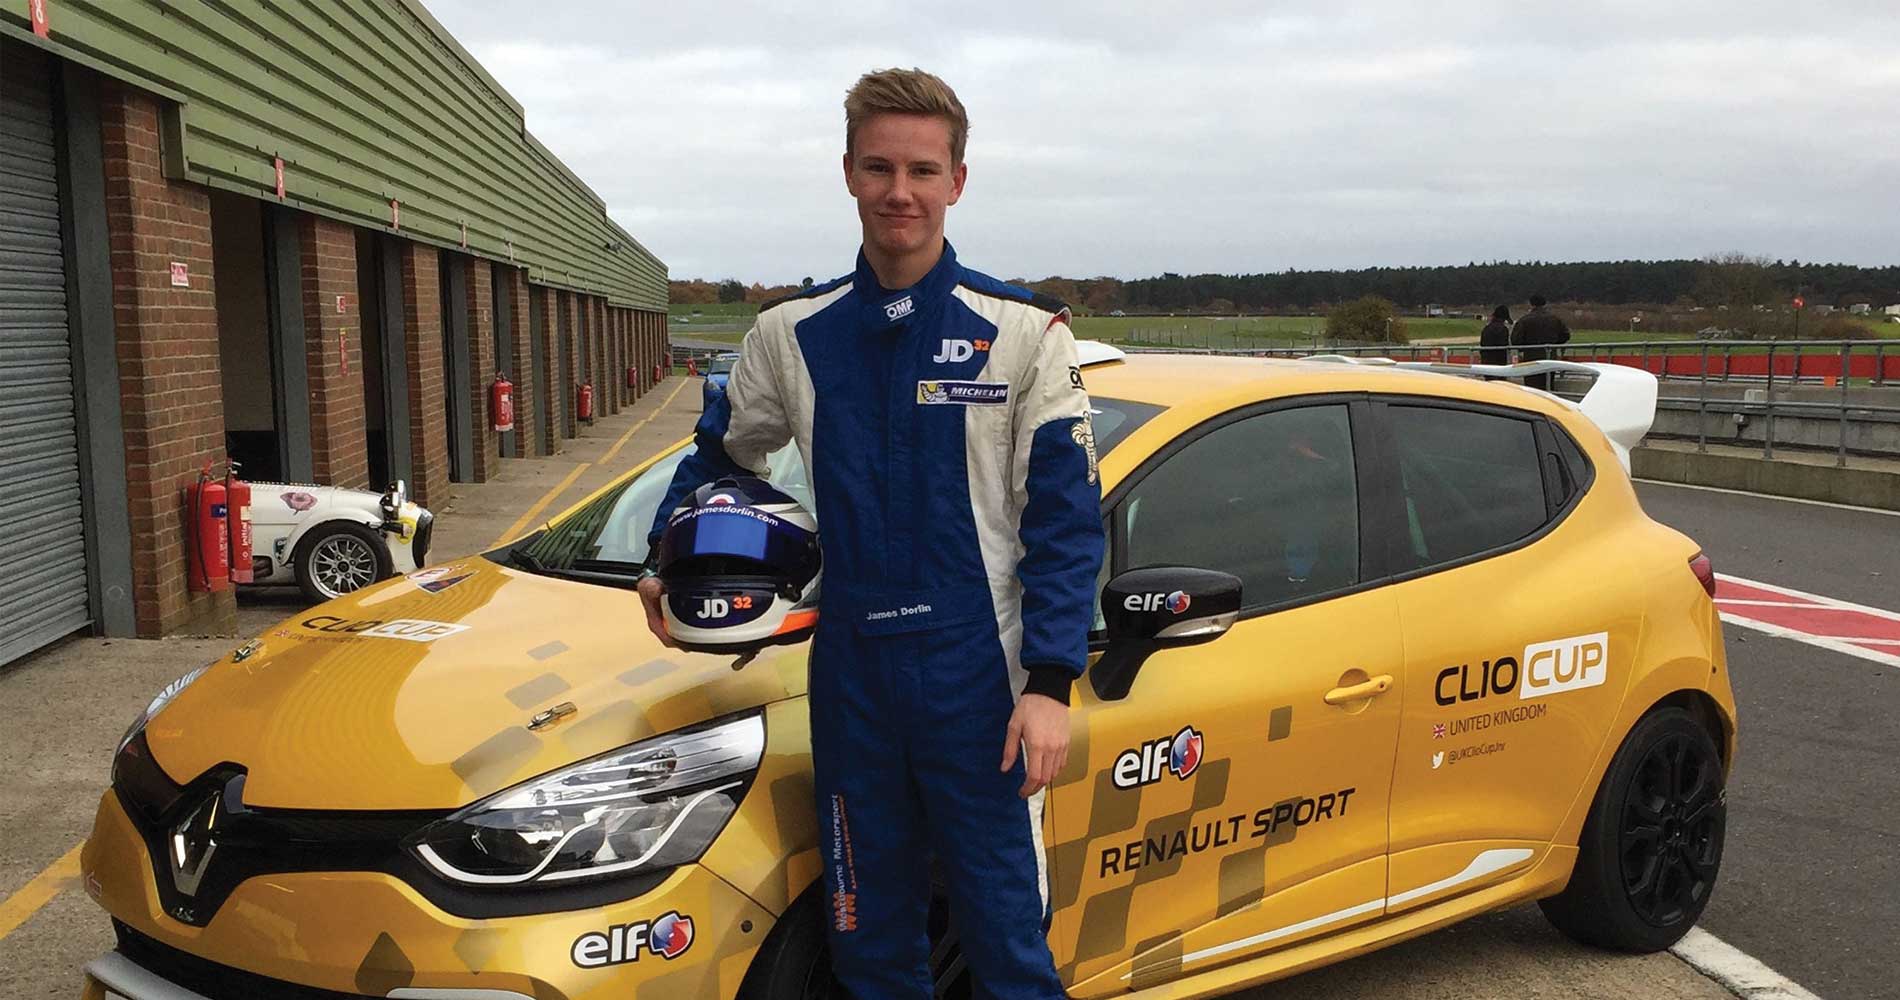 michelin-clio-series-champ-dorlin-closing-on-renault-uk-clio-cup-deal-with-westbourne-after-prize-test-motorsportdays-track-days-1